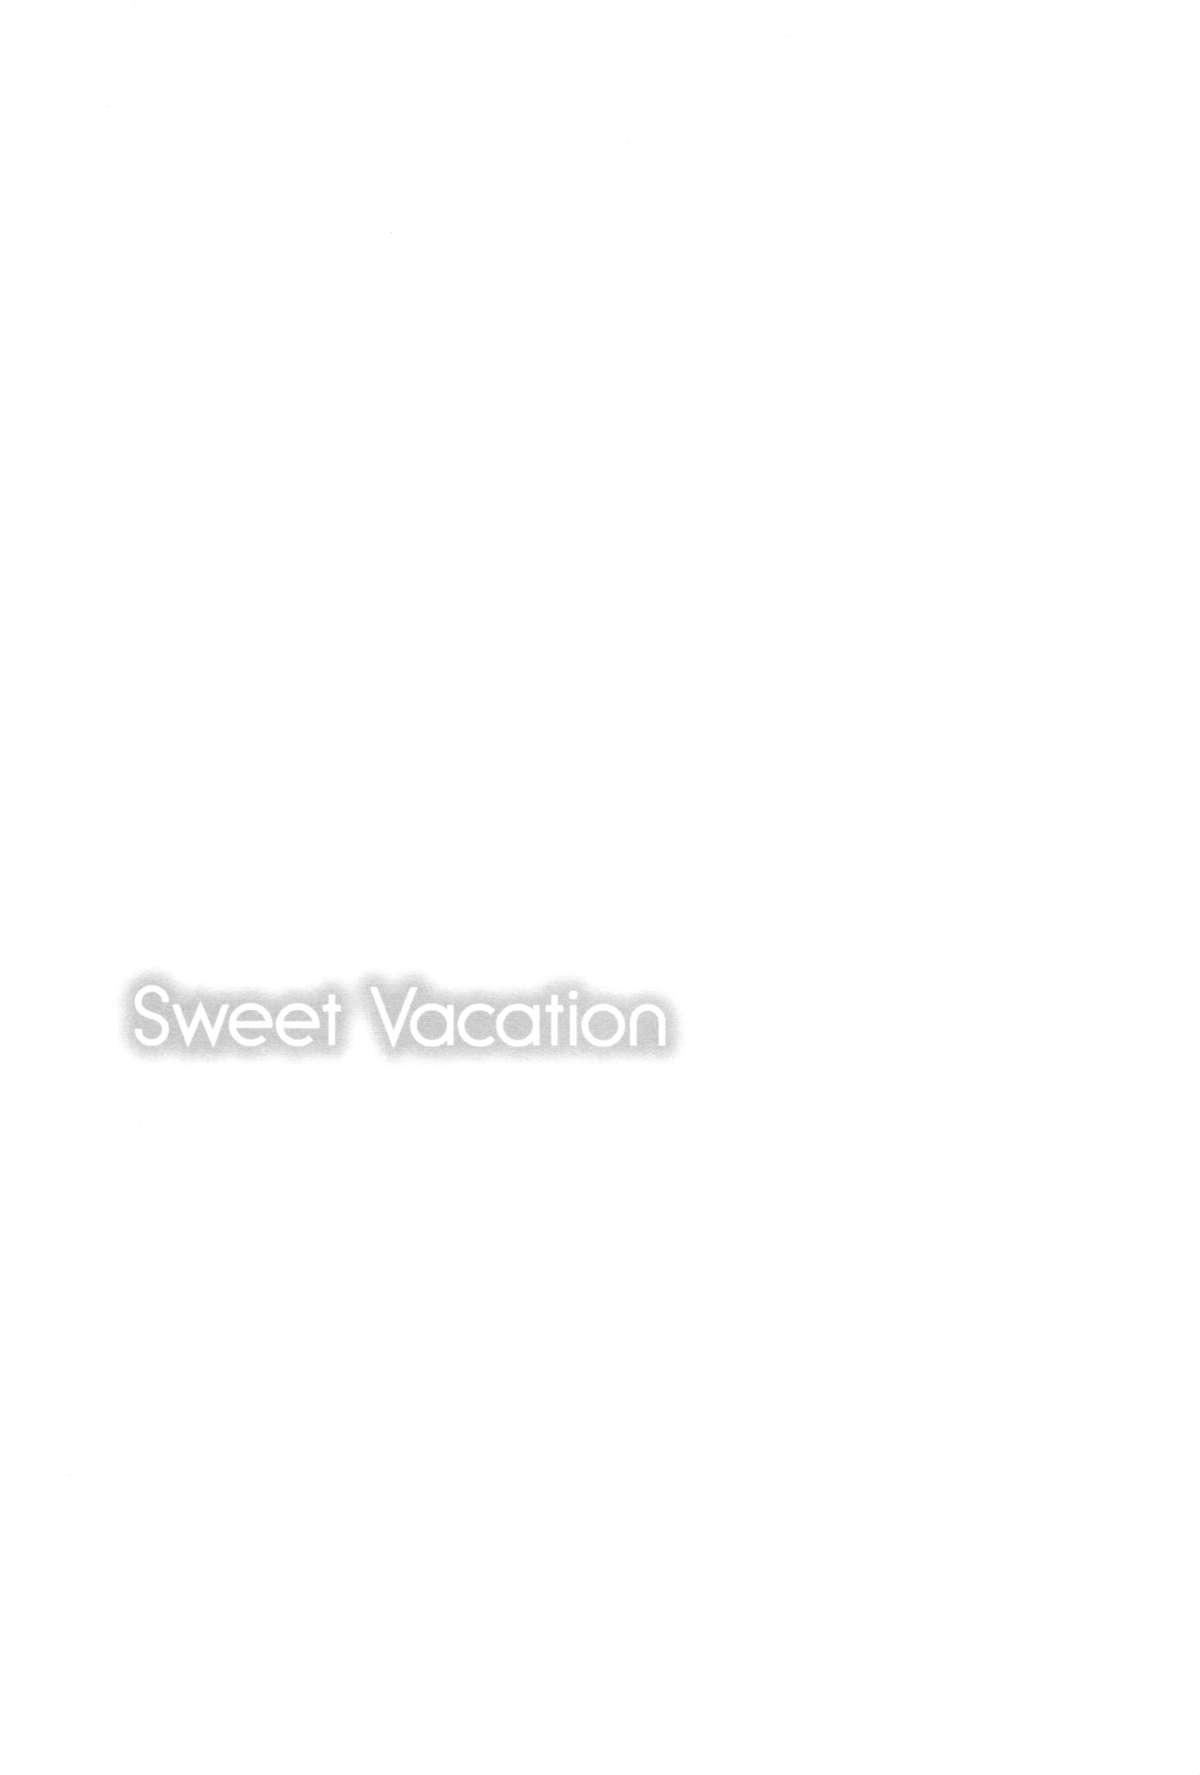 Sweet Vacation 15